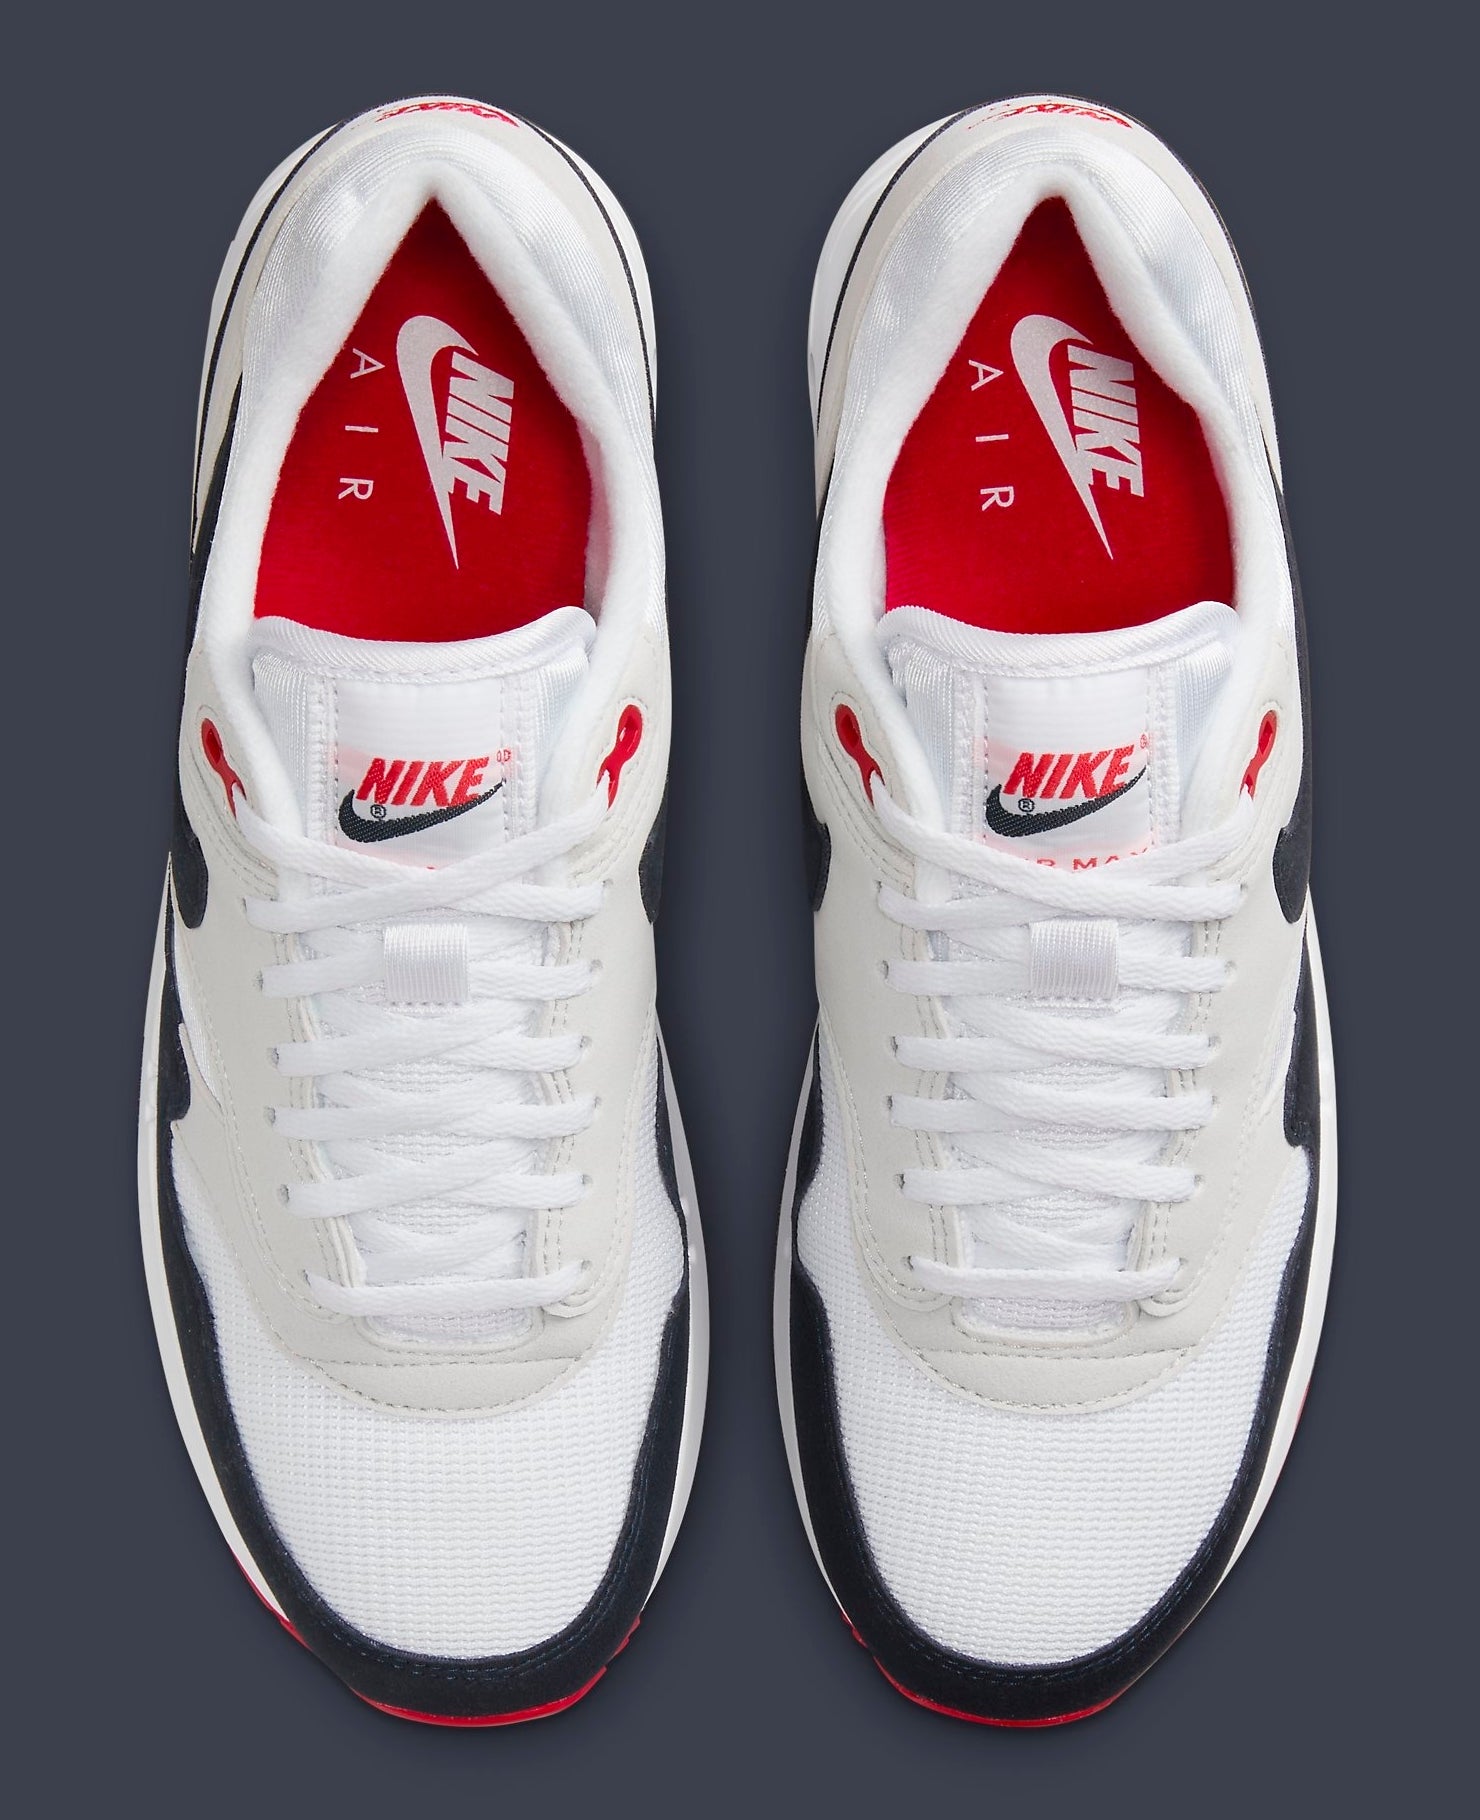 Watch before you buy Nike Air Max 1 '86 OG G Navy Red (Obsidian